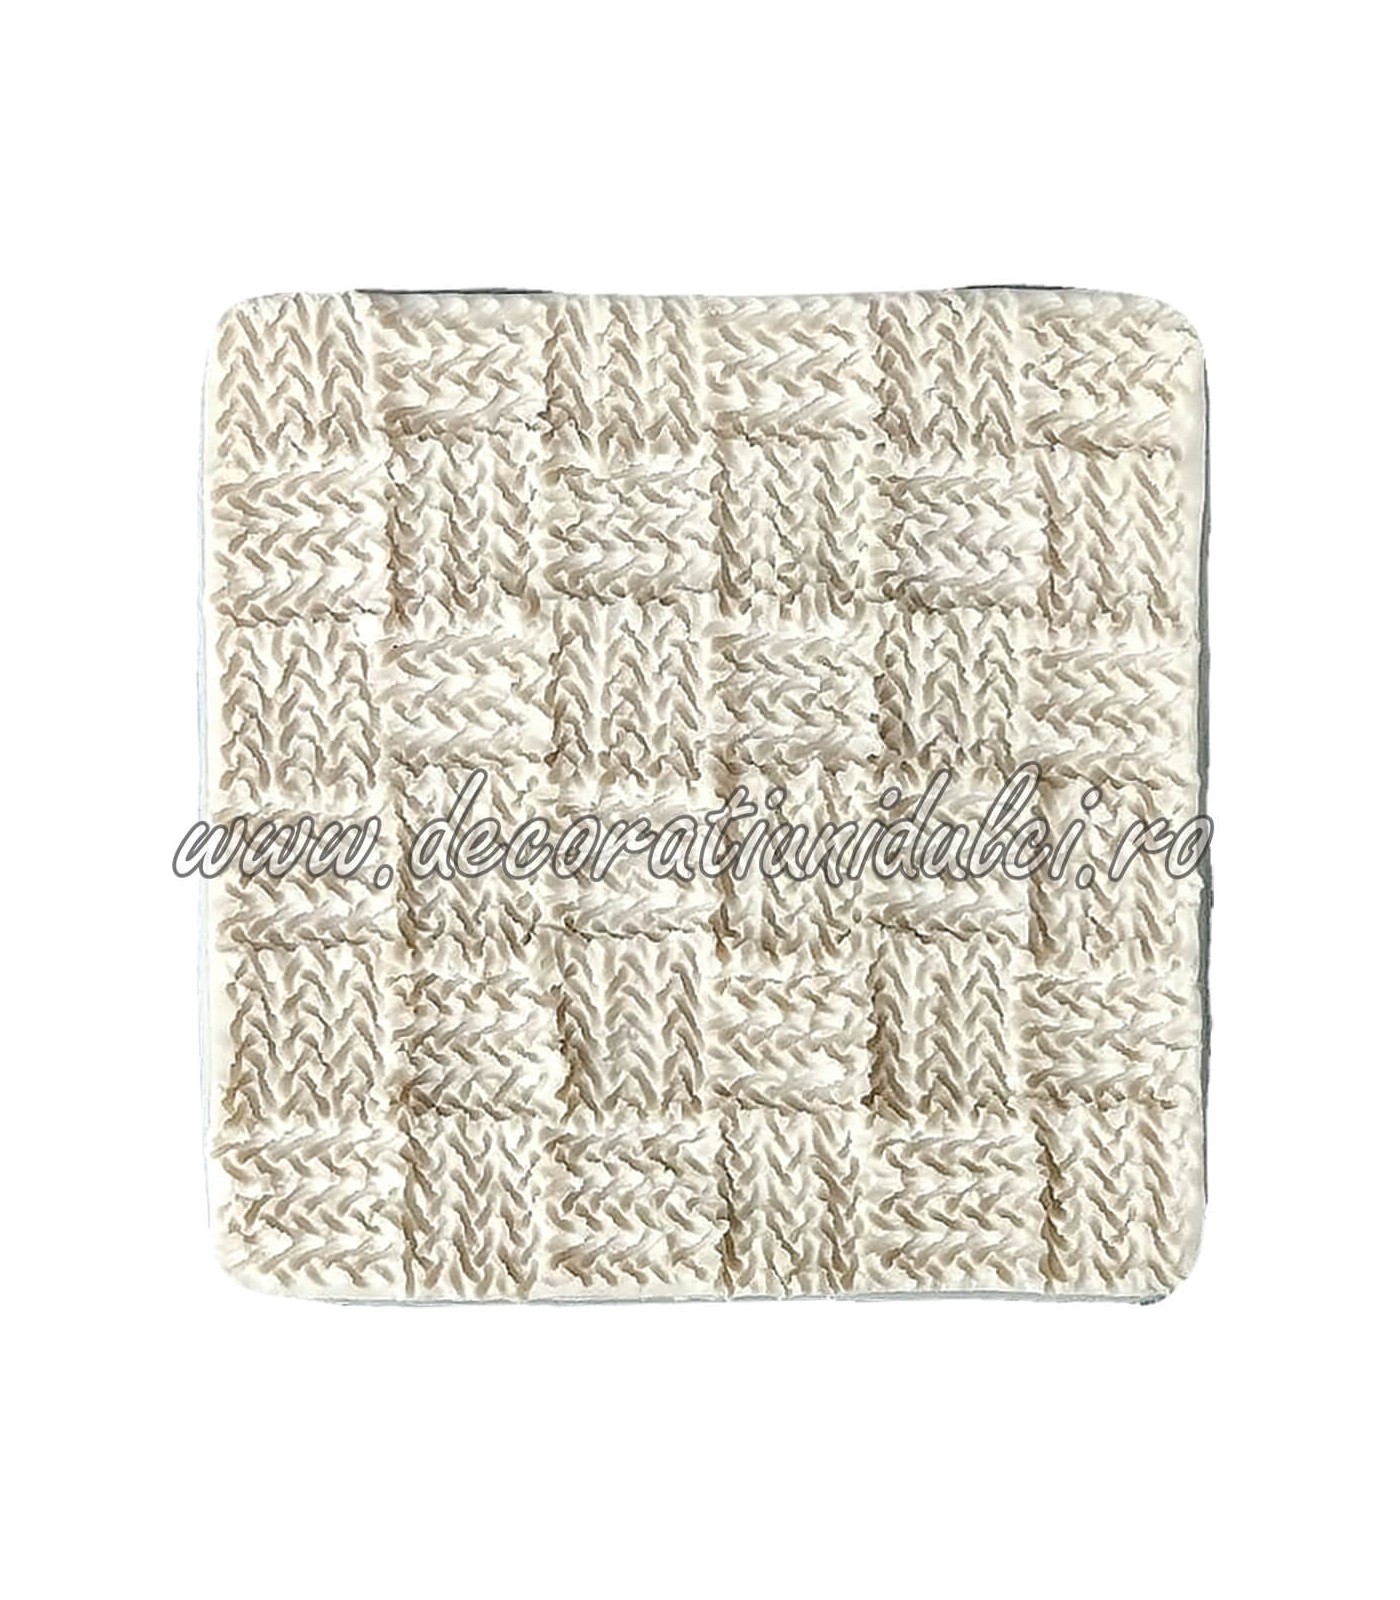 Mold pattern woven squares